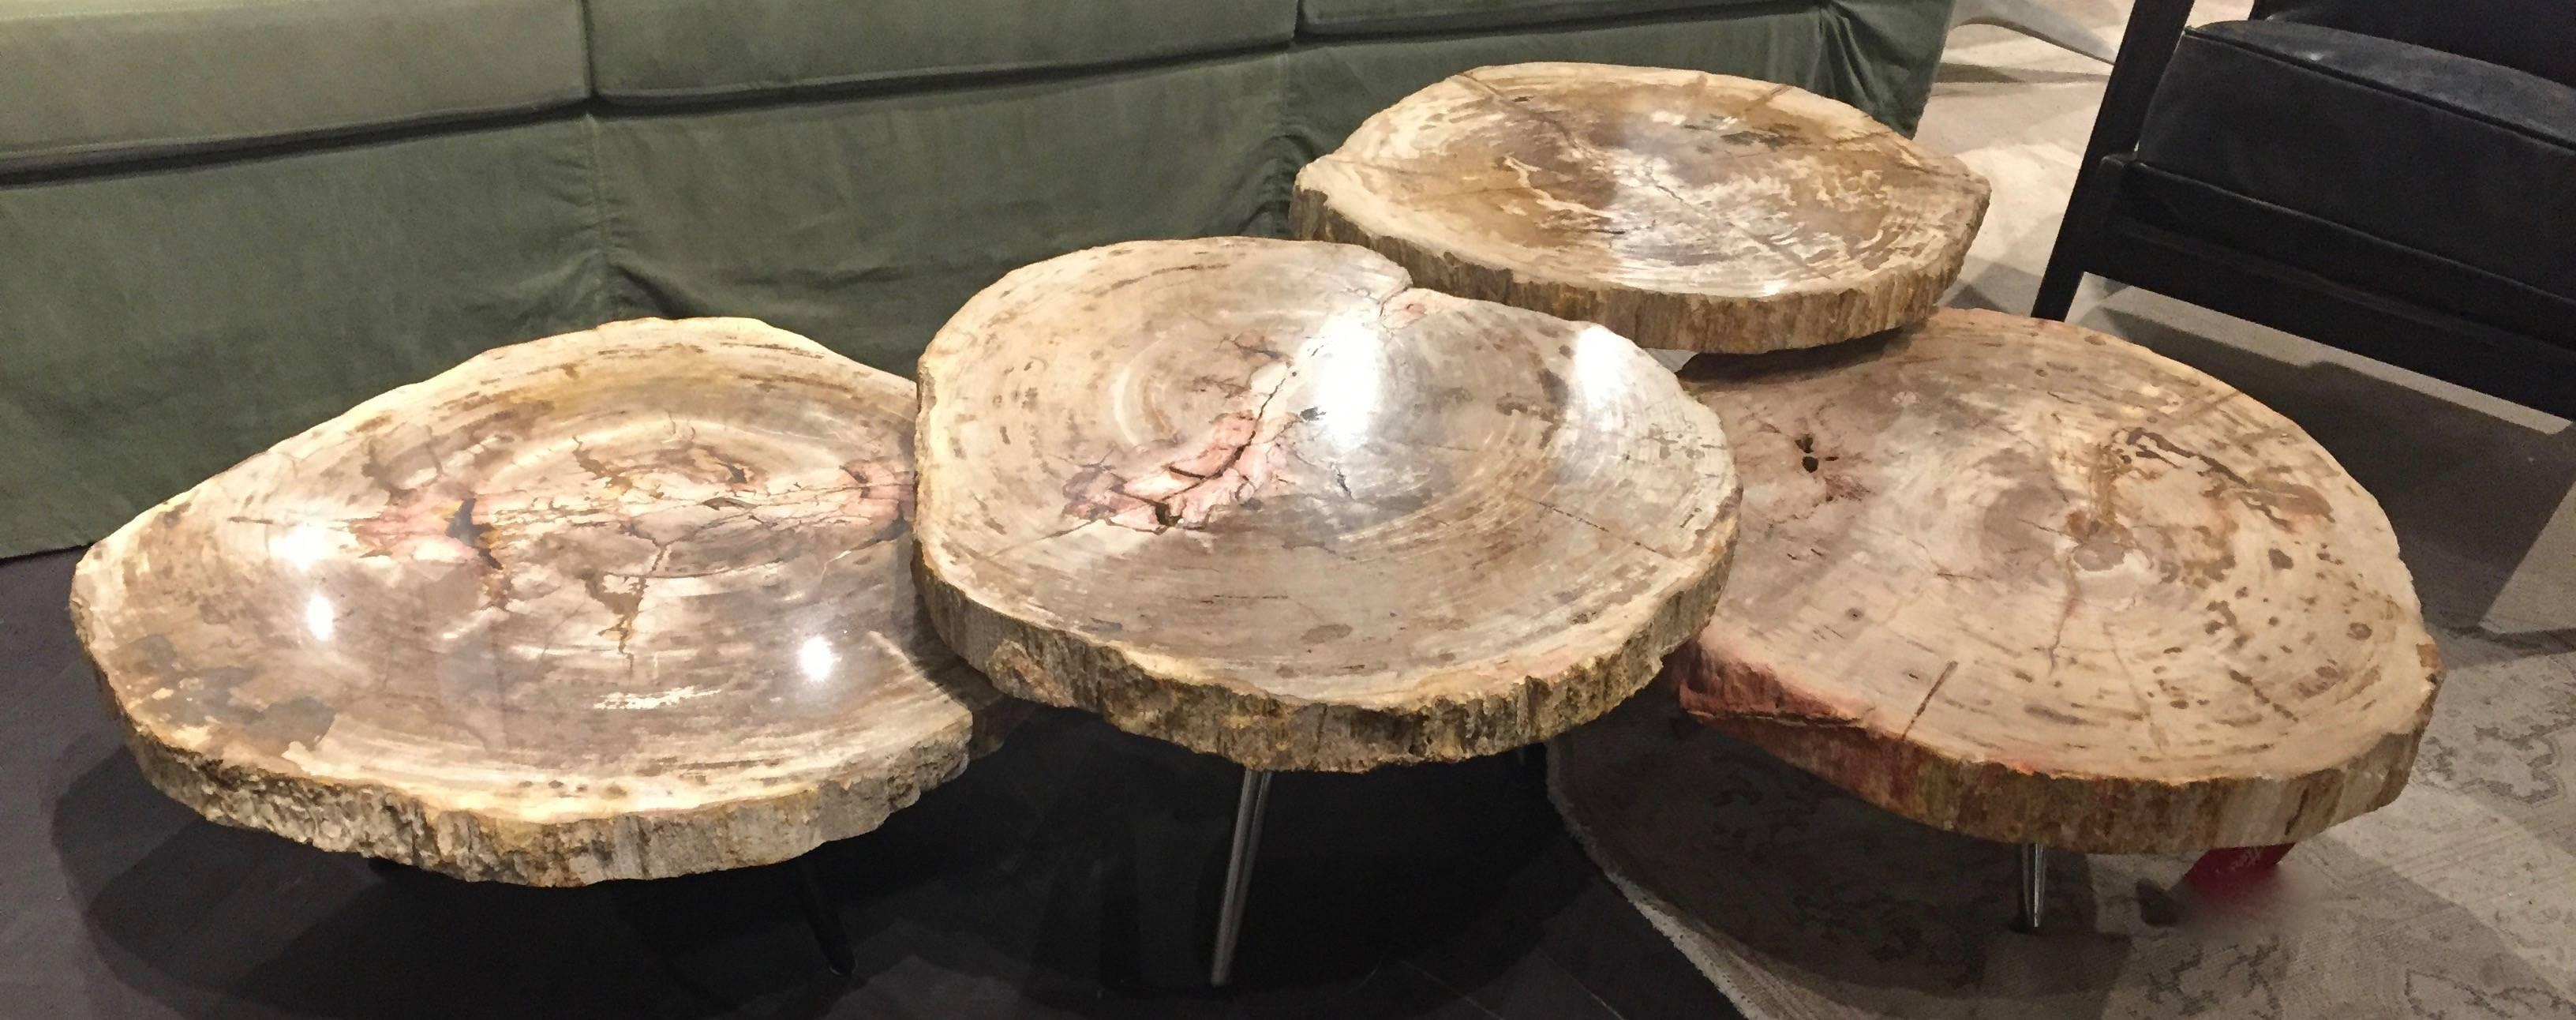 Grouping of (4) Petrified wood tables with steel base. Contact to confirm availability of all tables or to purchase individual table. 

range from 28x 26x 11
24